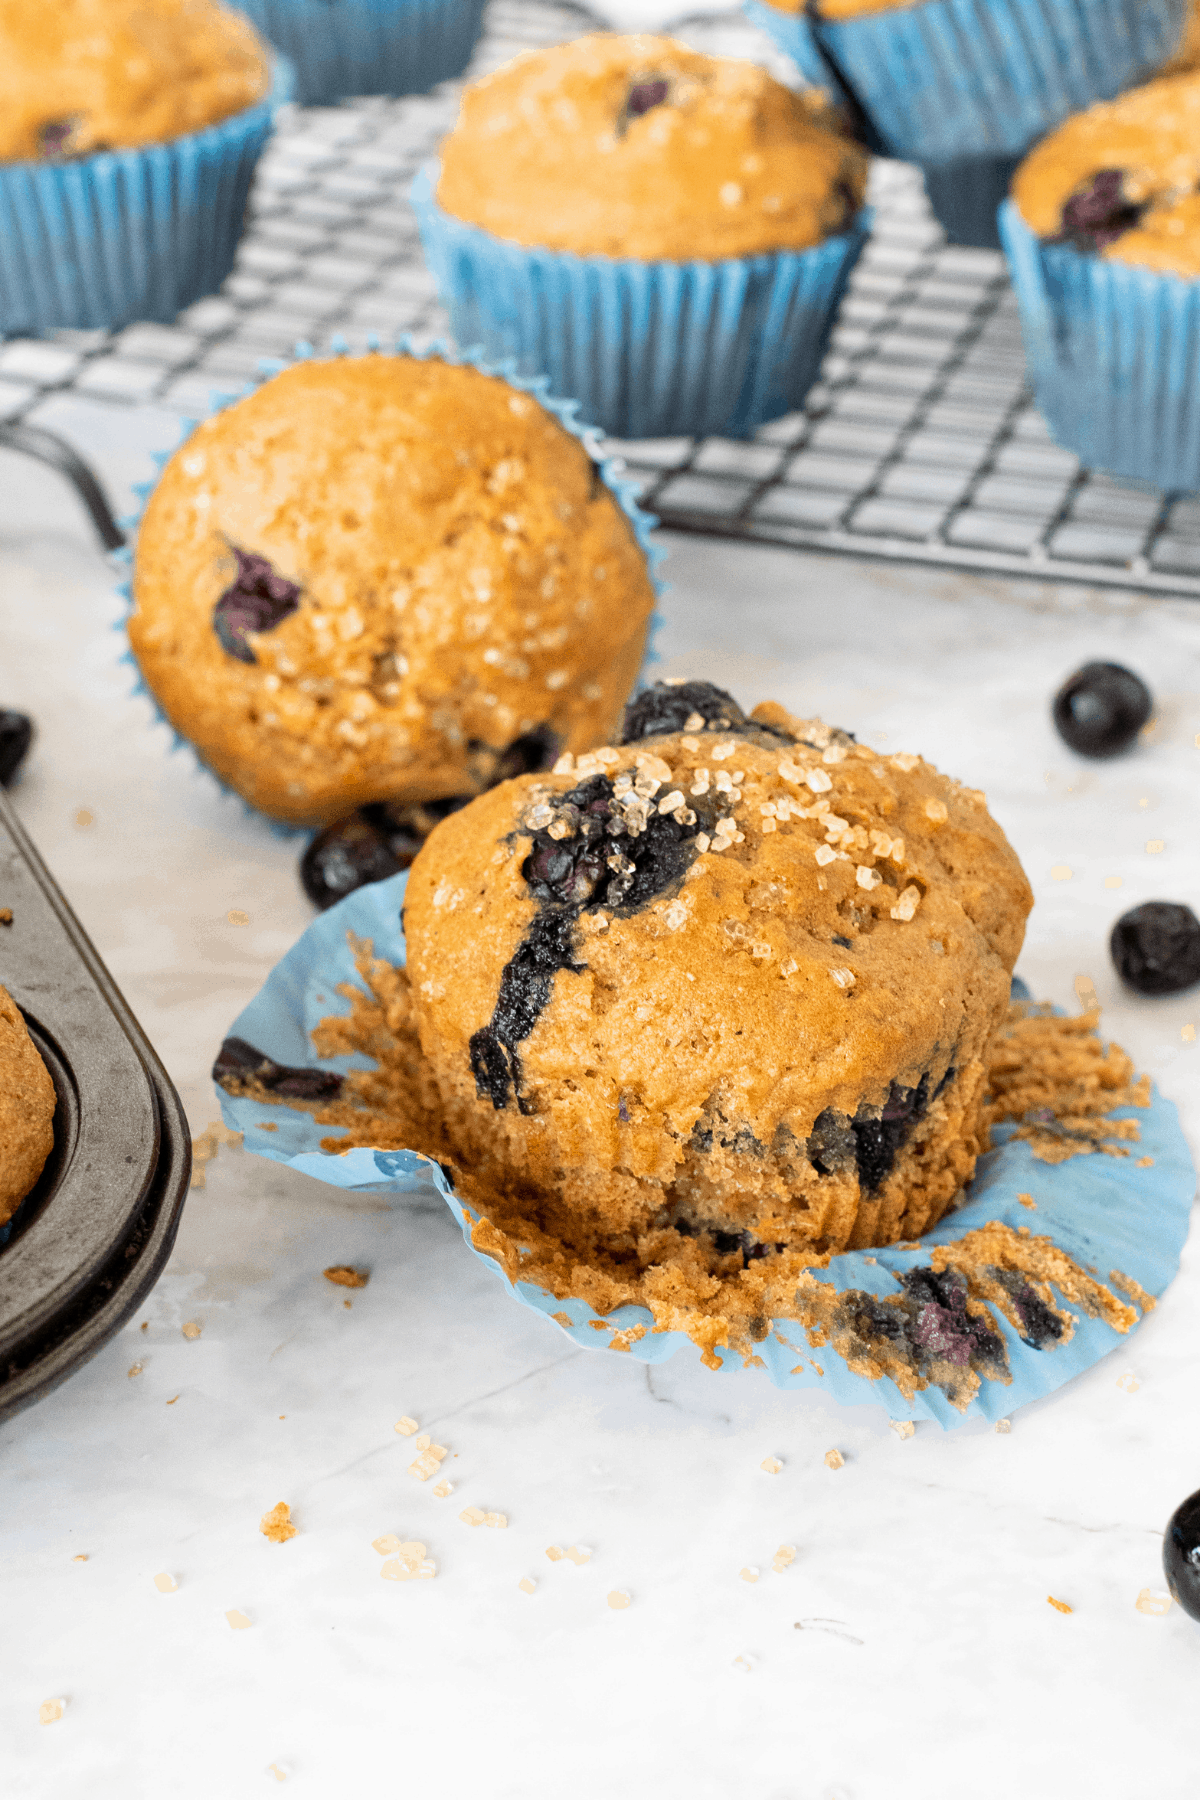 blueberry muffin in a cupcake liner with more muffins behind it.